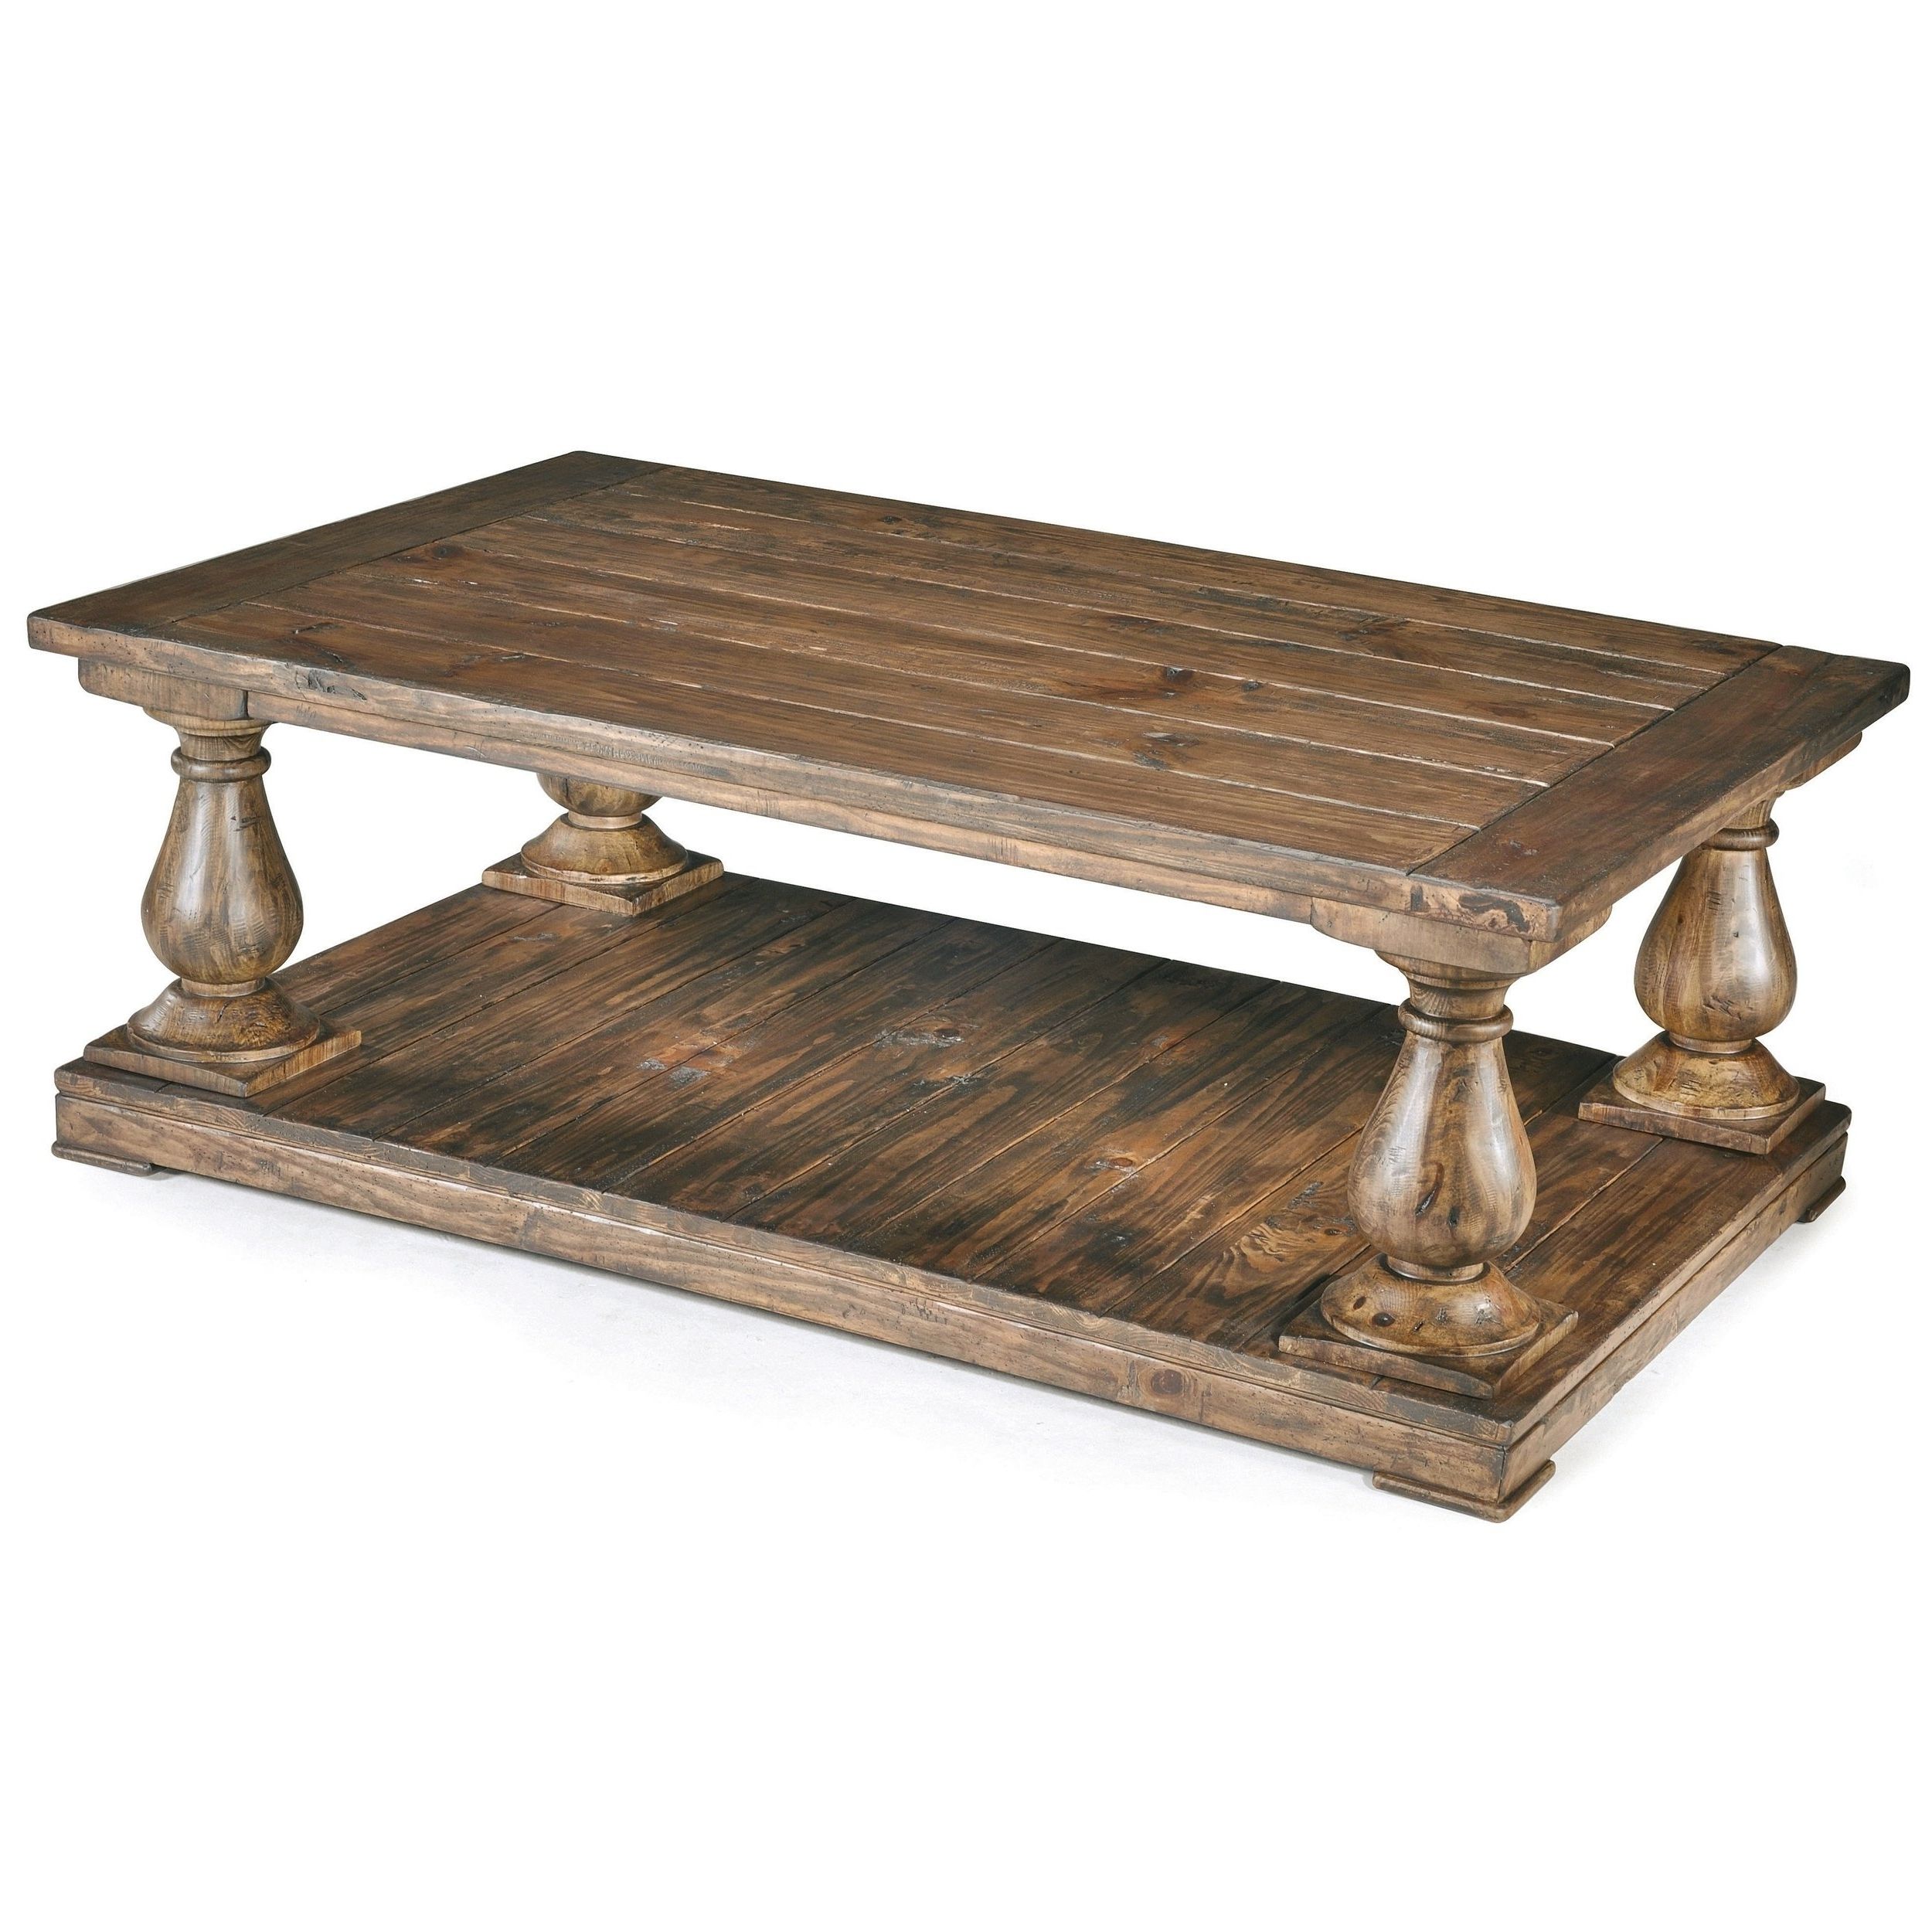 Trendy Natural Pine Coffee Tables Pertaining To Shop Densbury Traditional Rustic Natural Pine Coffee Table – On Sale (View 4 of 20)